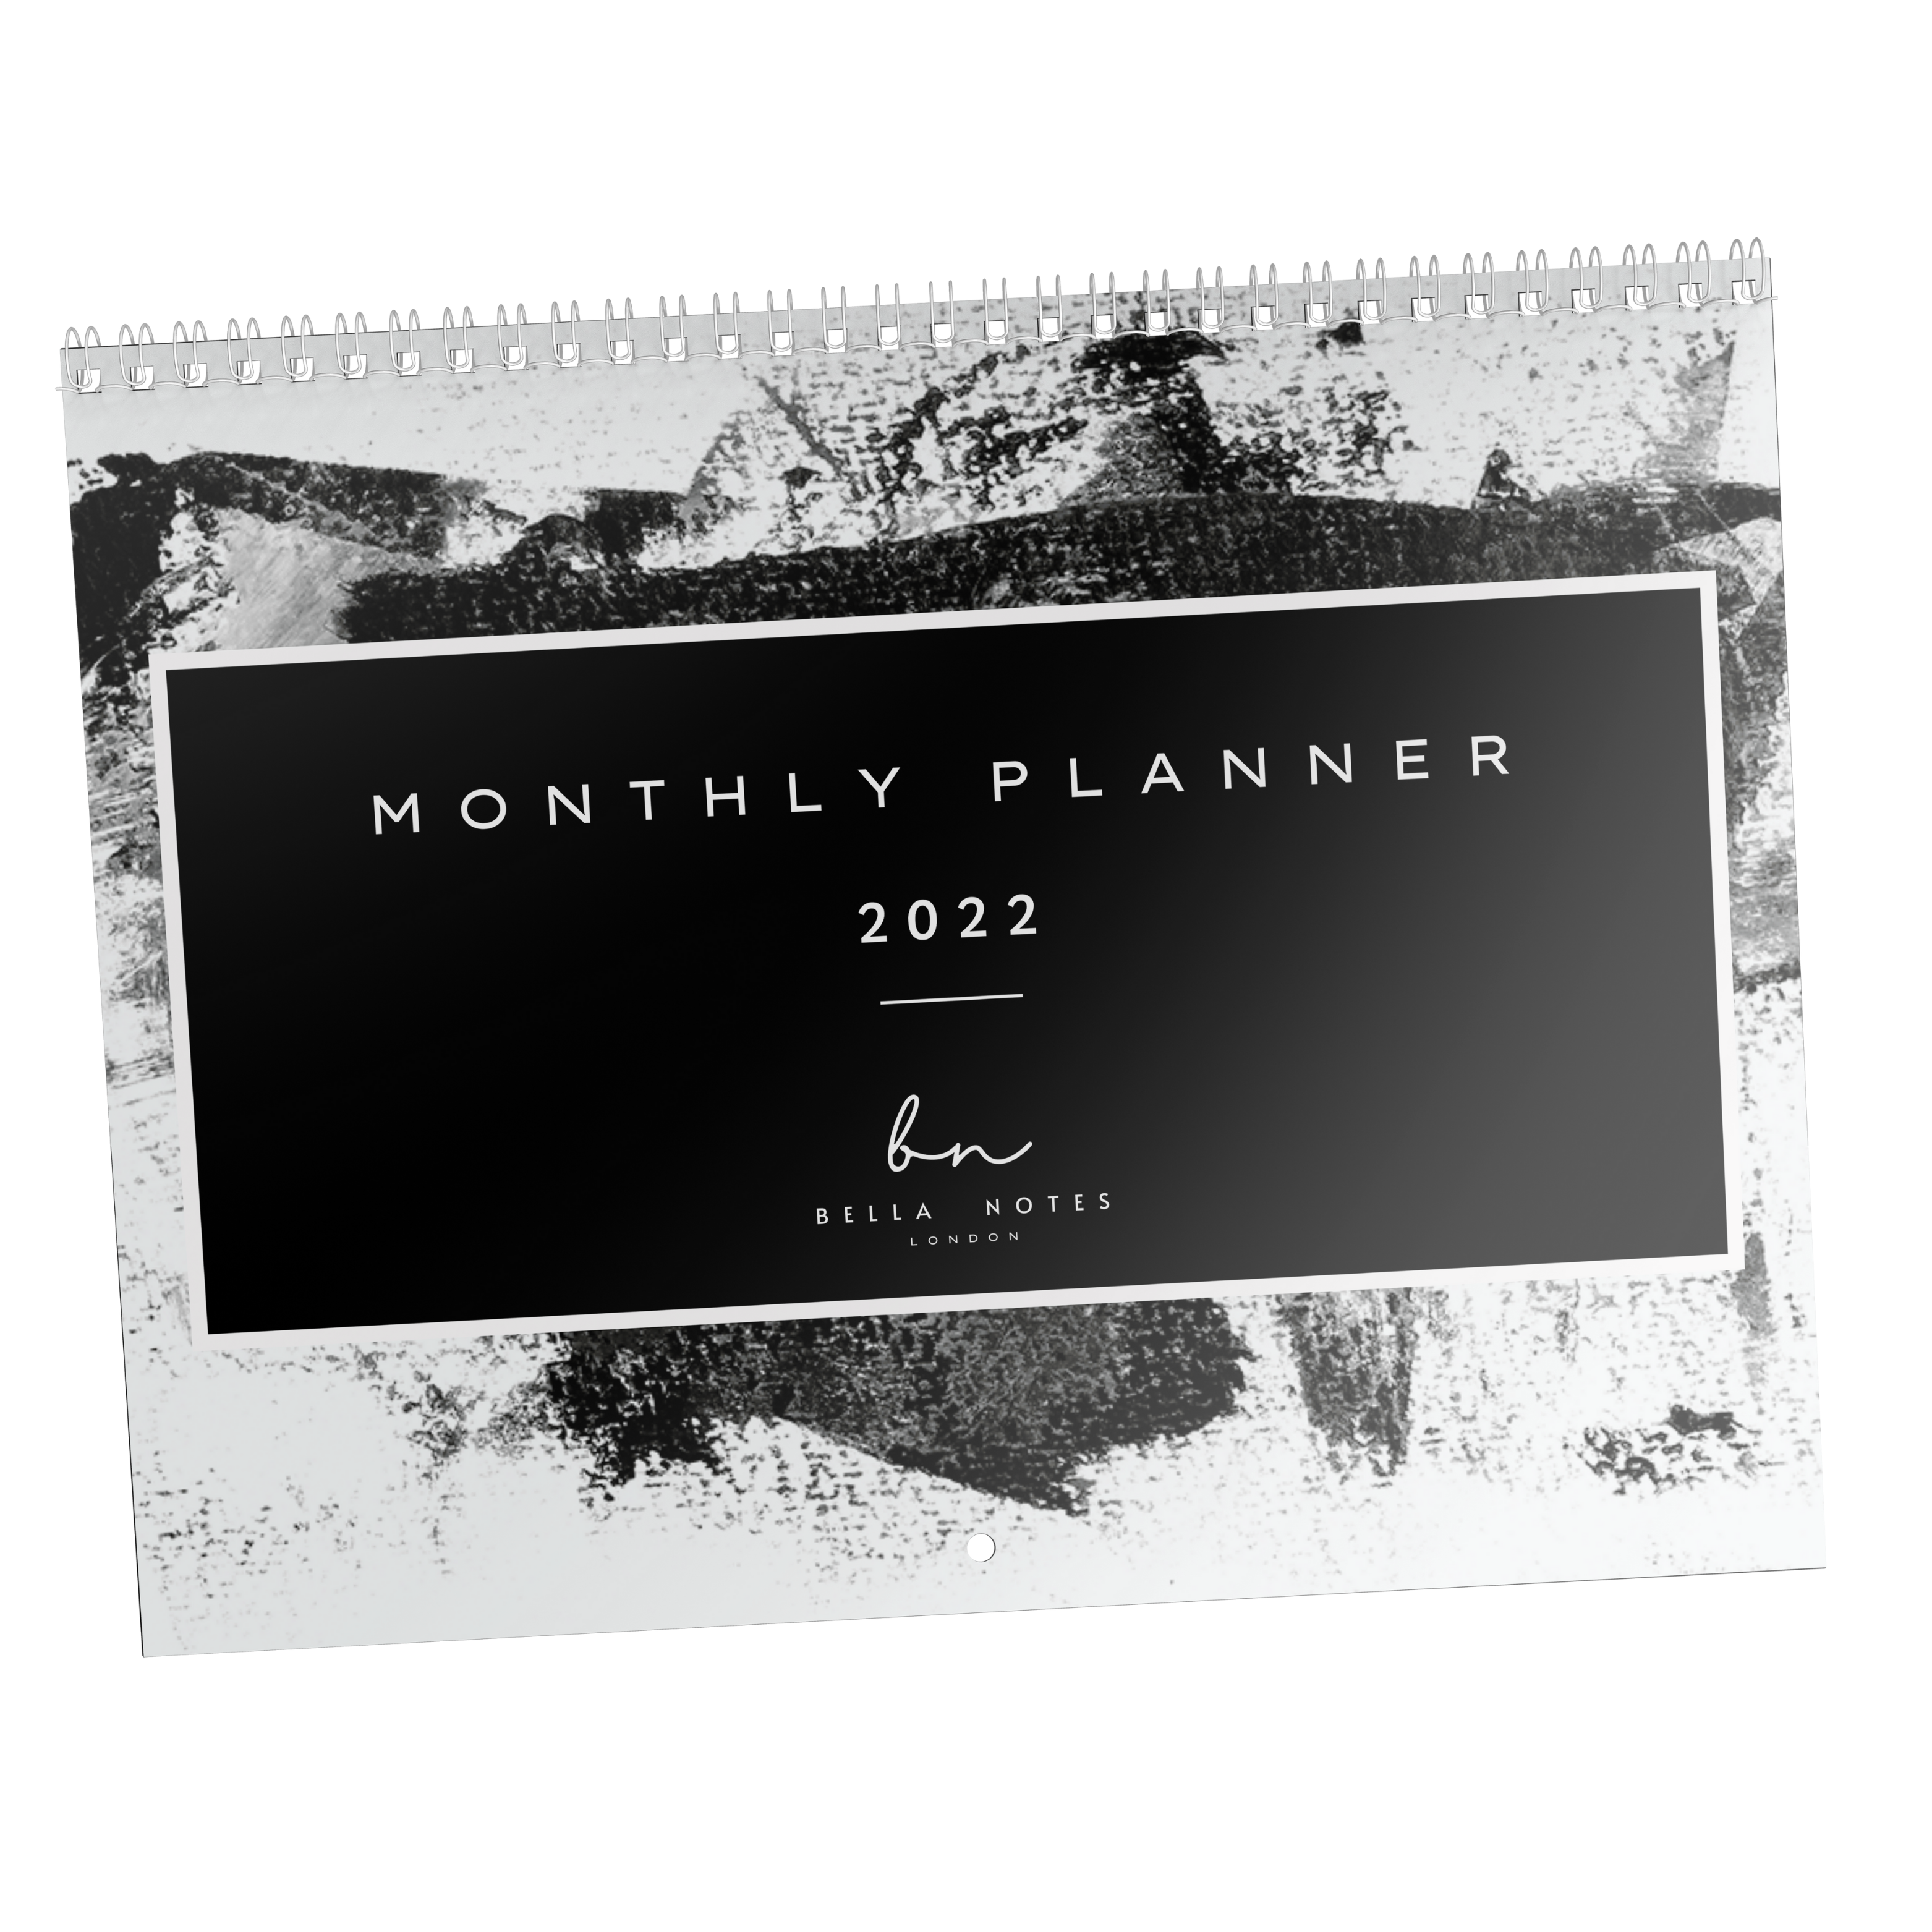 Mono Paint Monthly Planner 2022